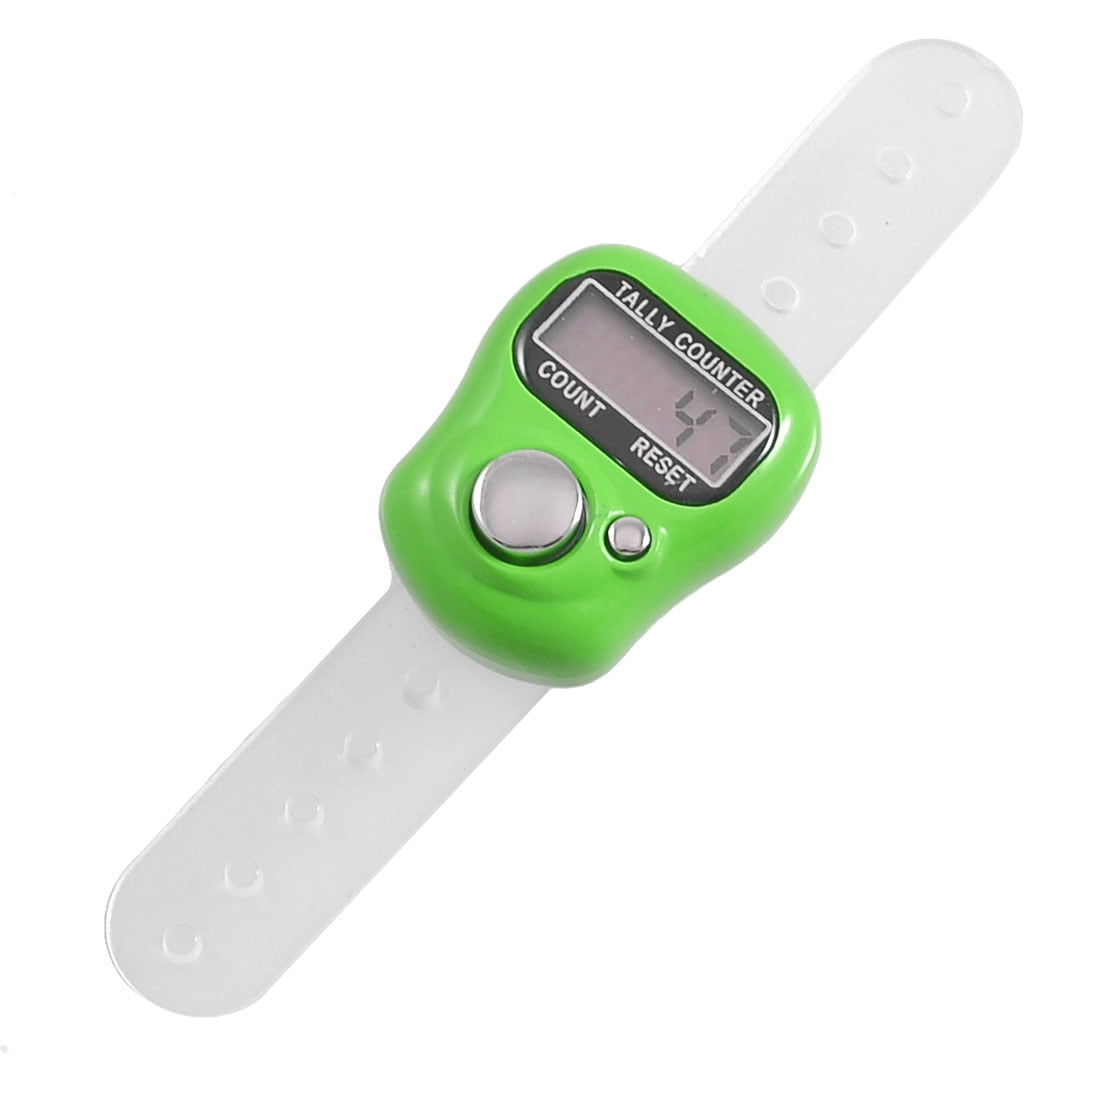 Green Plastic Case 5 Digit LCD Electronic Finger Counter Hand Tally I2X9 